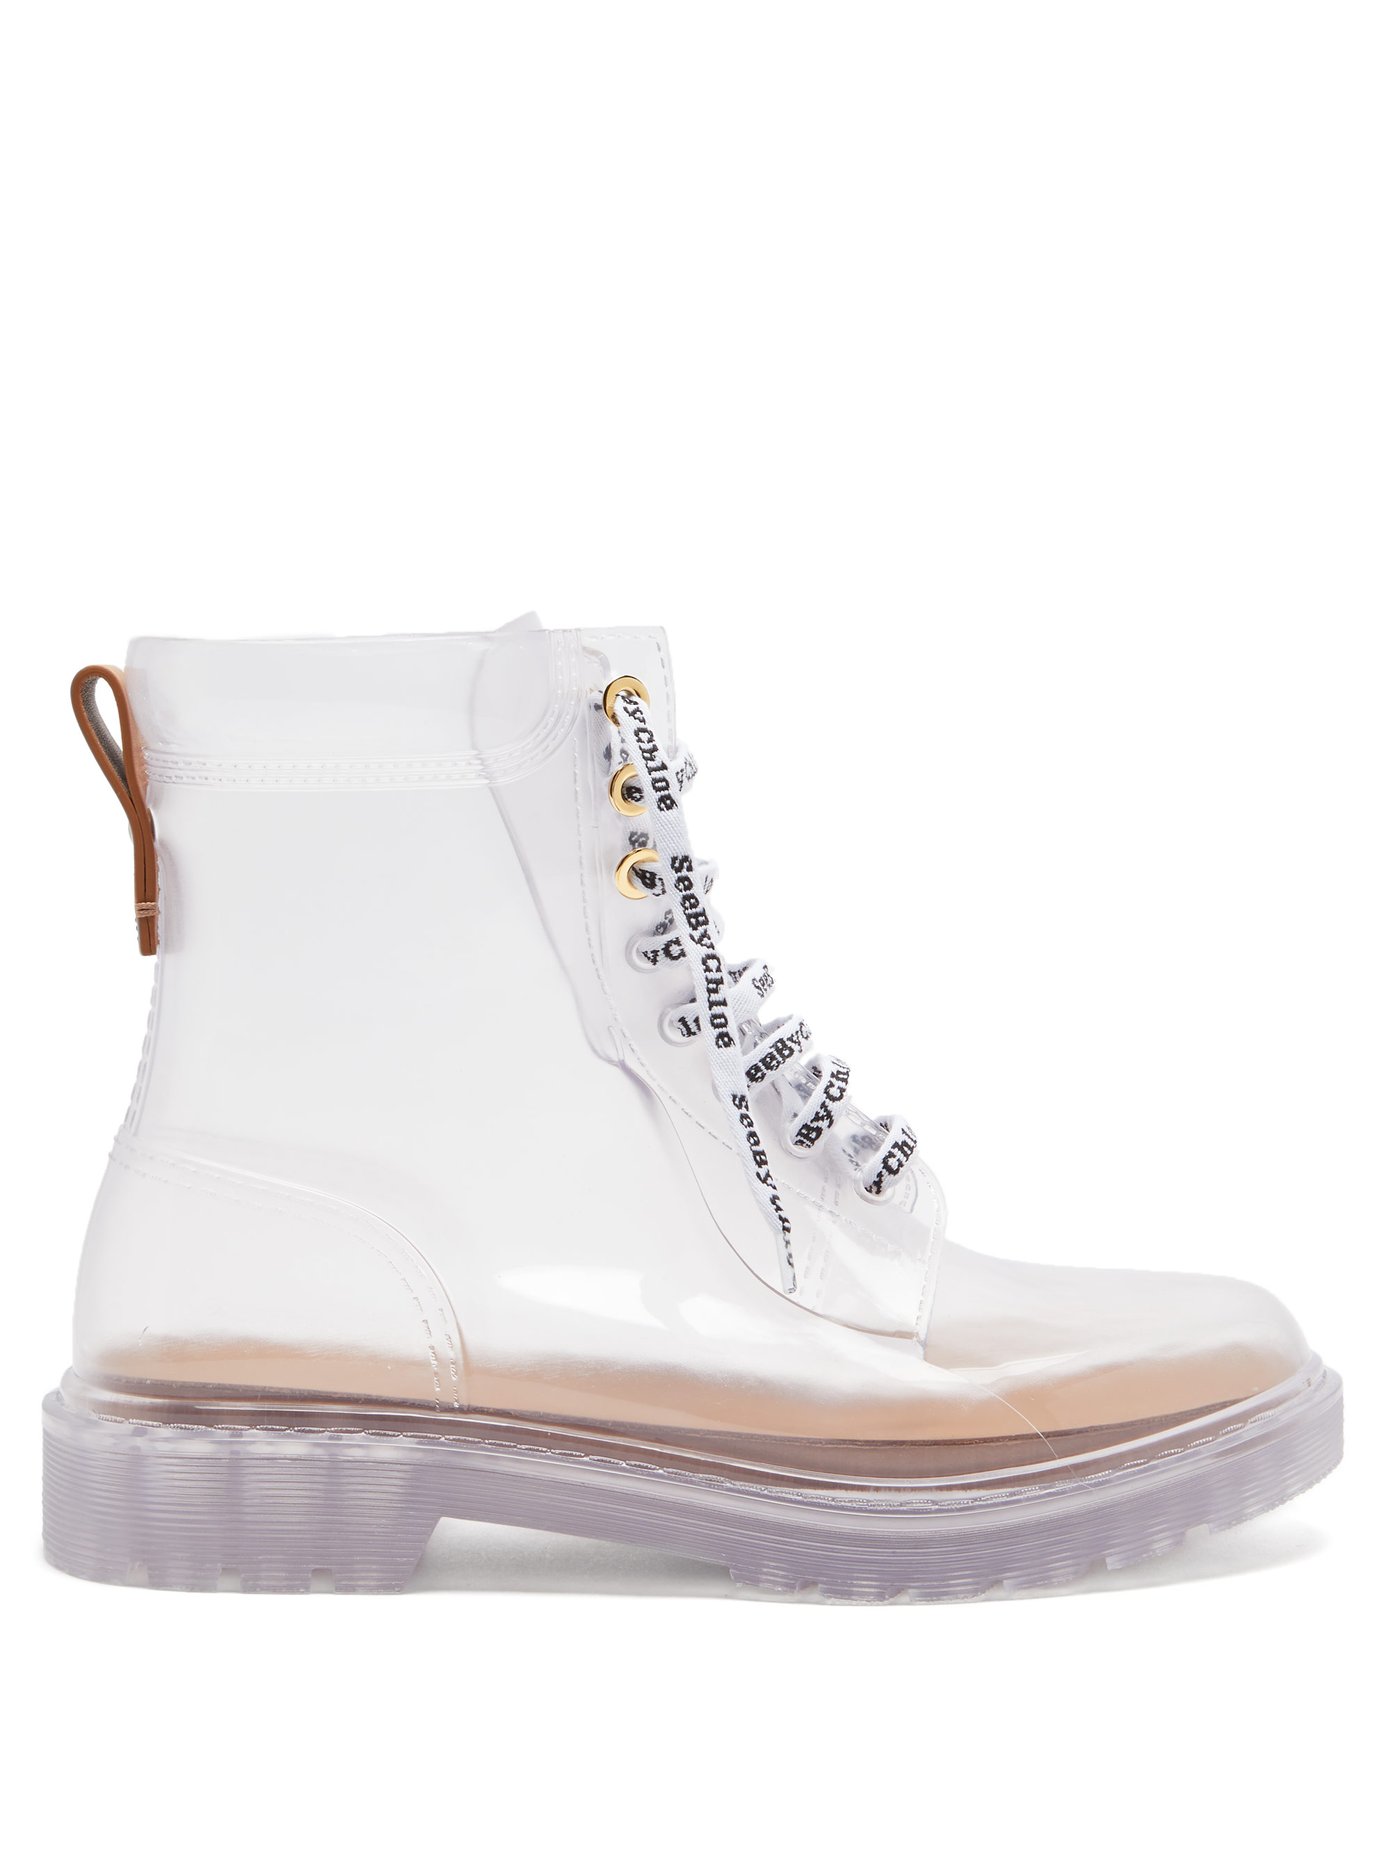 see by chloe ankle boots uk